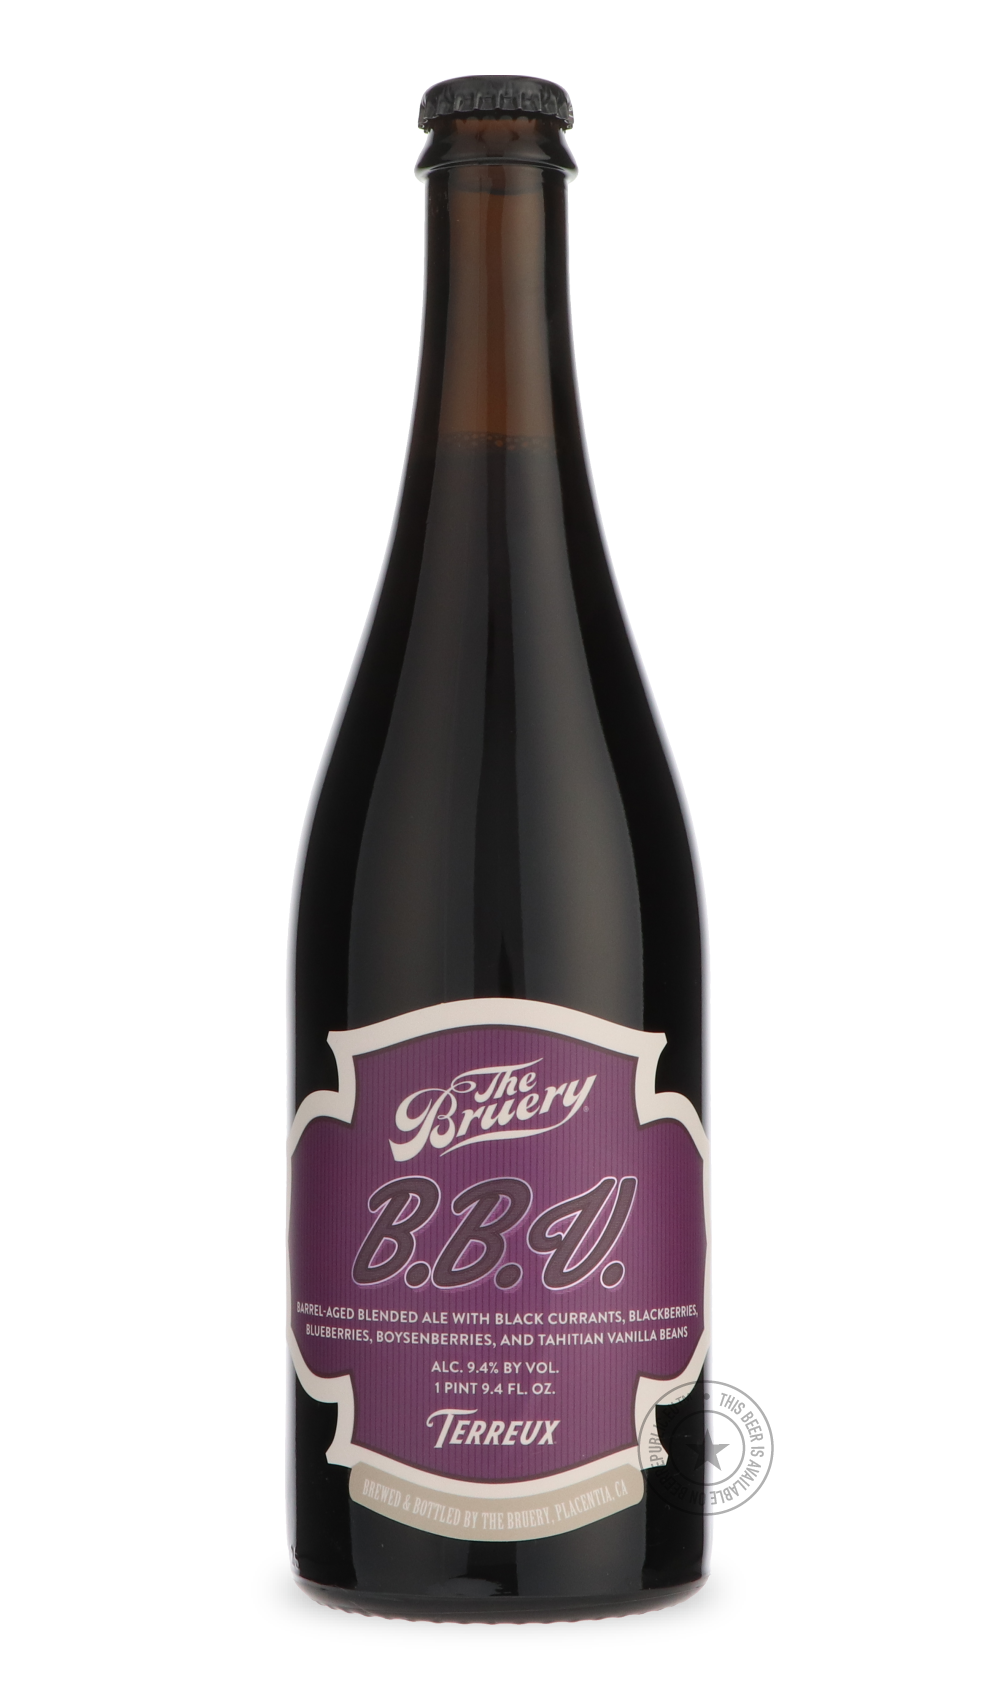 -The Bruery- B.B.V.-Sour / Wild & Fruity- Only @ Beer Republic - The best online beer store for American & Canadian craft beer - Buy beer online from the USA and Canada - Bier online kopen - Amerikaans bier kopen - Craft beer store - Craft beer kopen - Amerikanisch bier kaufen - Bier online kaufen - Acheter biere online - IPA - Stout - Porter - New England IPA - Hazy IPA - Imperial Stout - Barrel Aged - Barrel Aged Imperial Stout - Brown - Dark beer - Blond - Blonde - Pilsner - Lager - Wheat - Weizen - Ambe